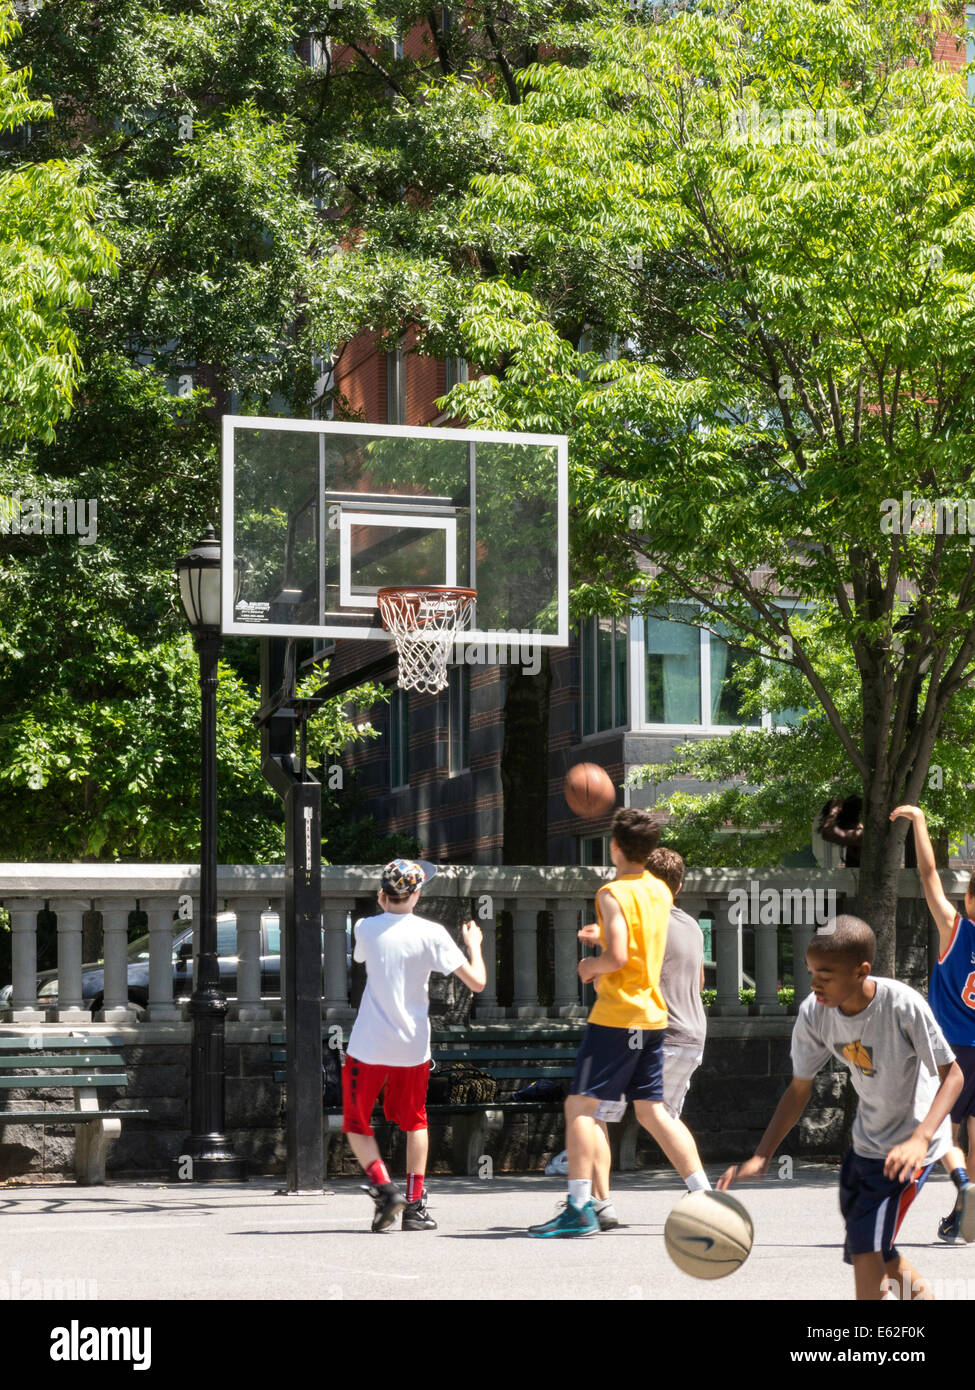 Basketball Court at Nelson A. Rockefeller Park in Battery Park City, NYC  Stock Photo - Alamy